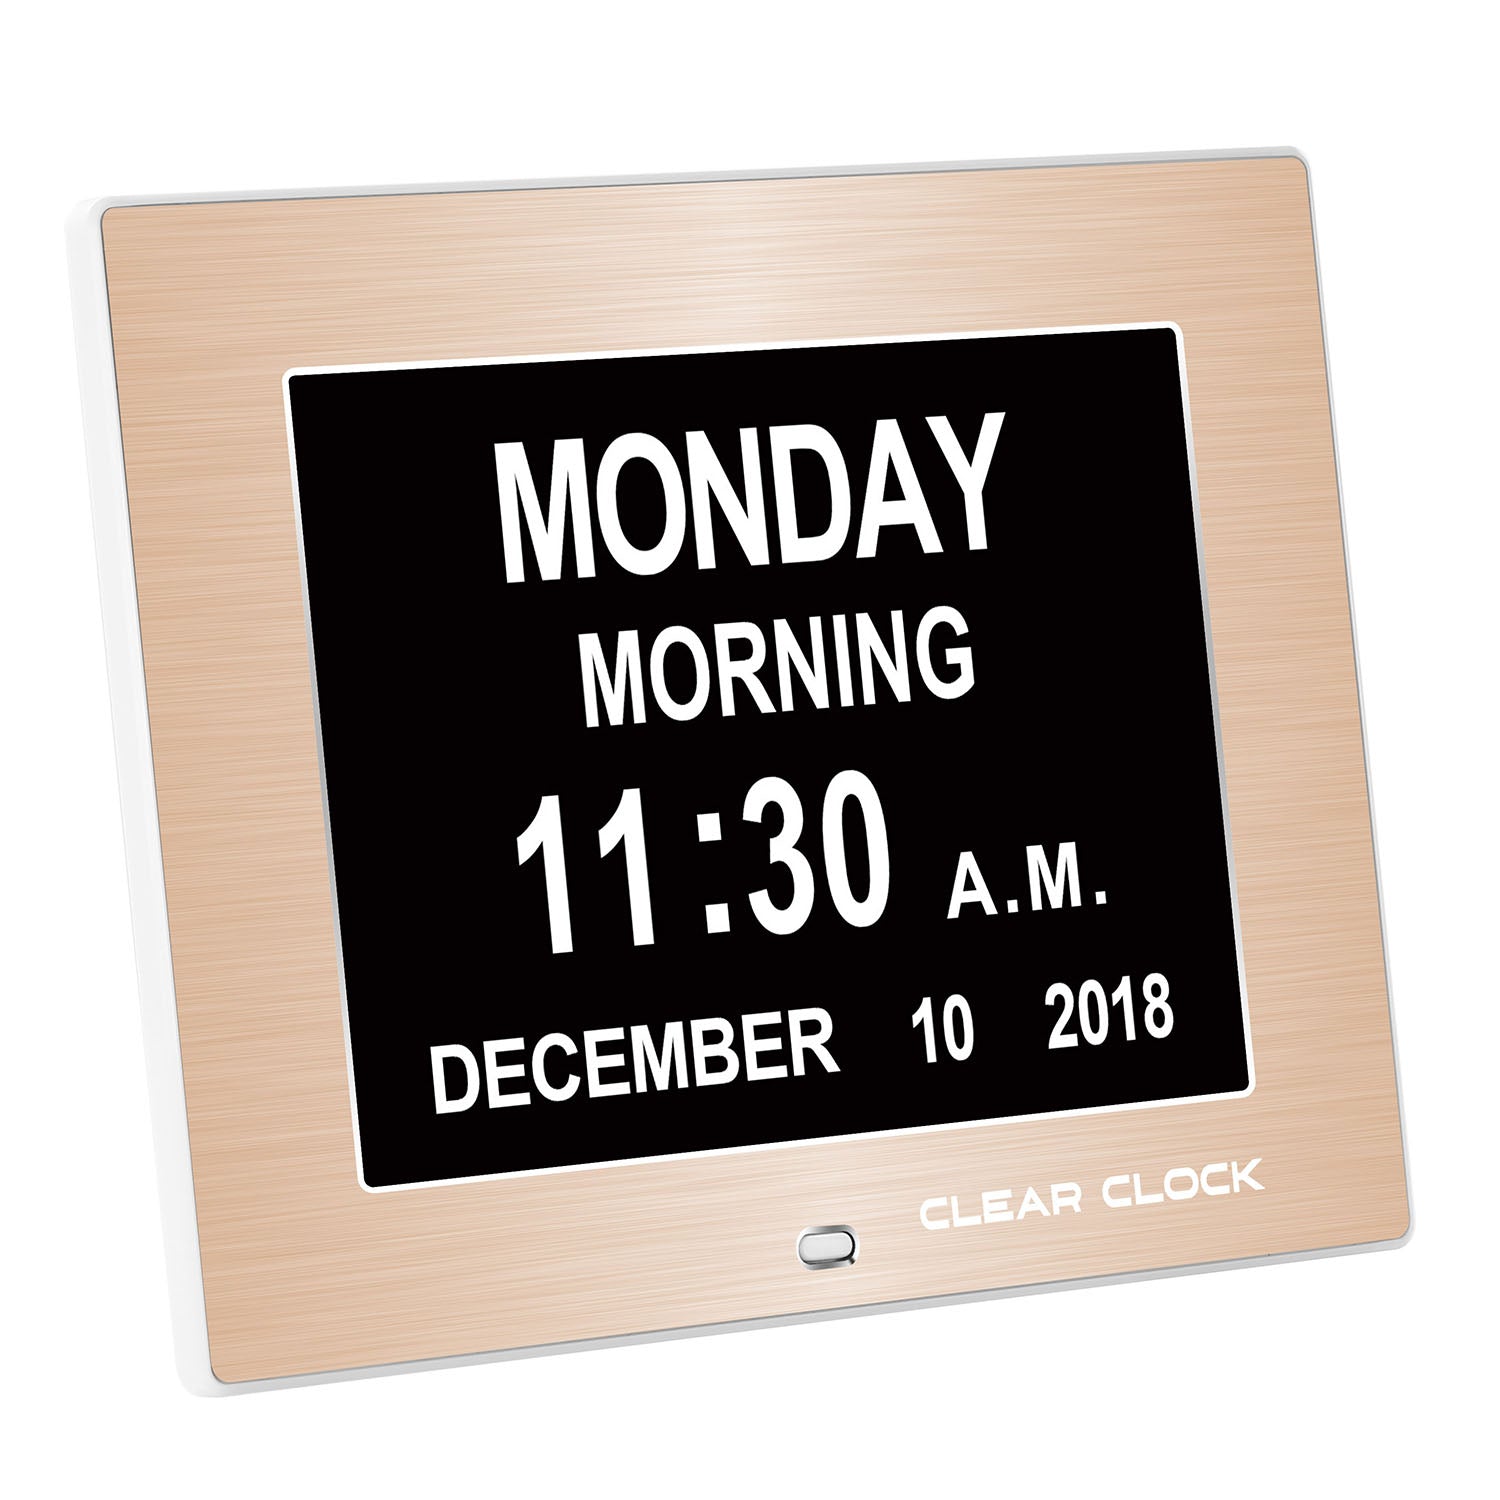 Clear Clock Digital Memory Loss Calendar Day Clock With Optional Day C